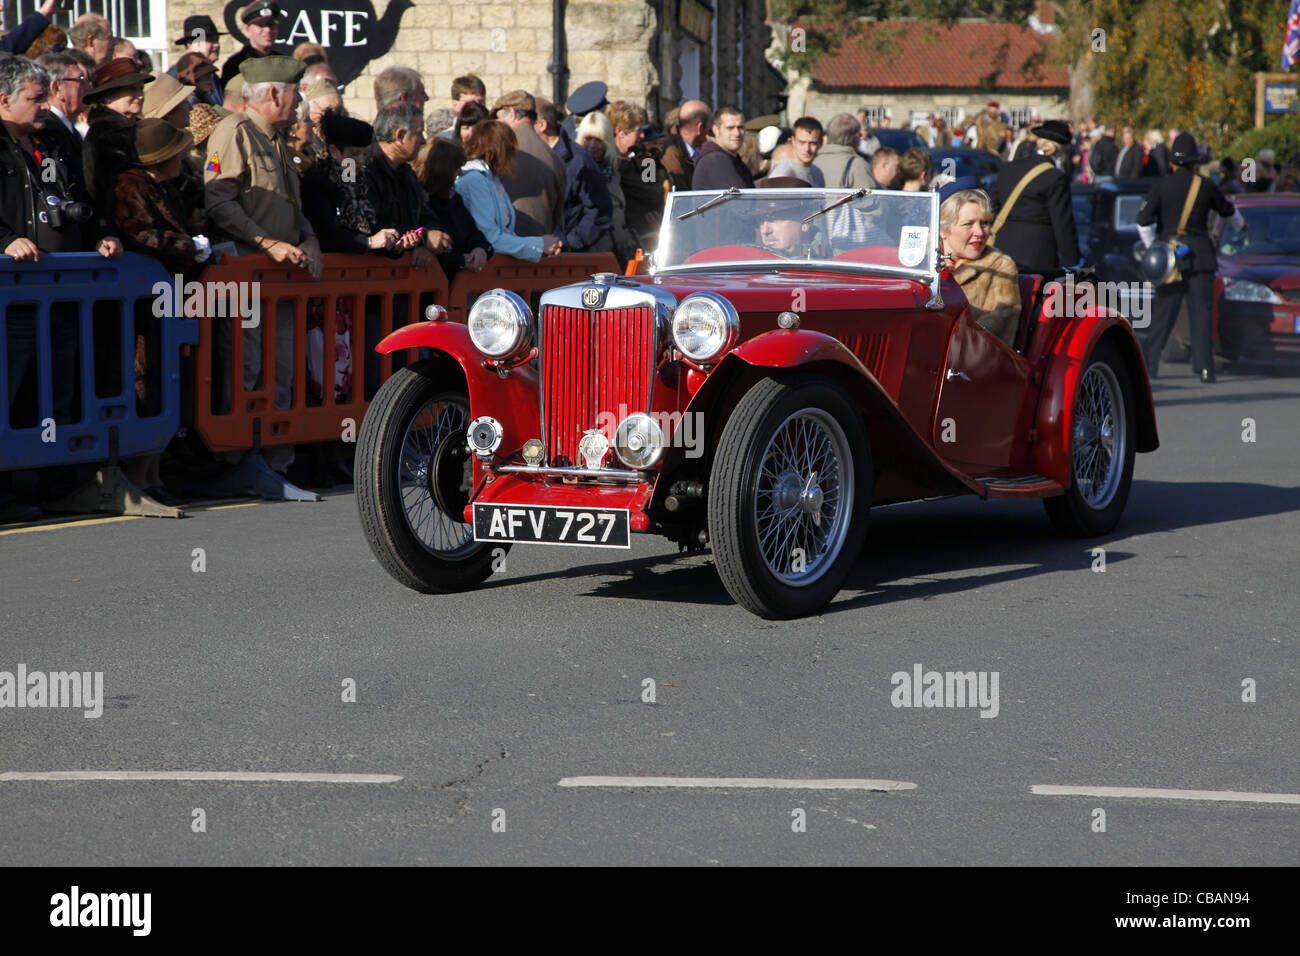 1940S RED MG CLASSIC CAR PICKERING NORTH YORKSHIRE 15 October 2011 Stock Photo